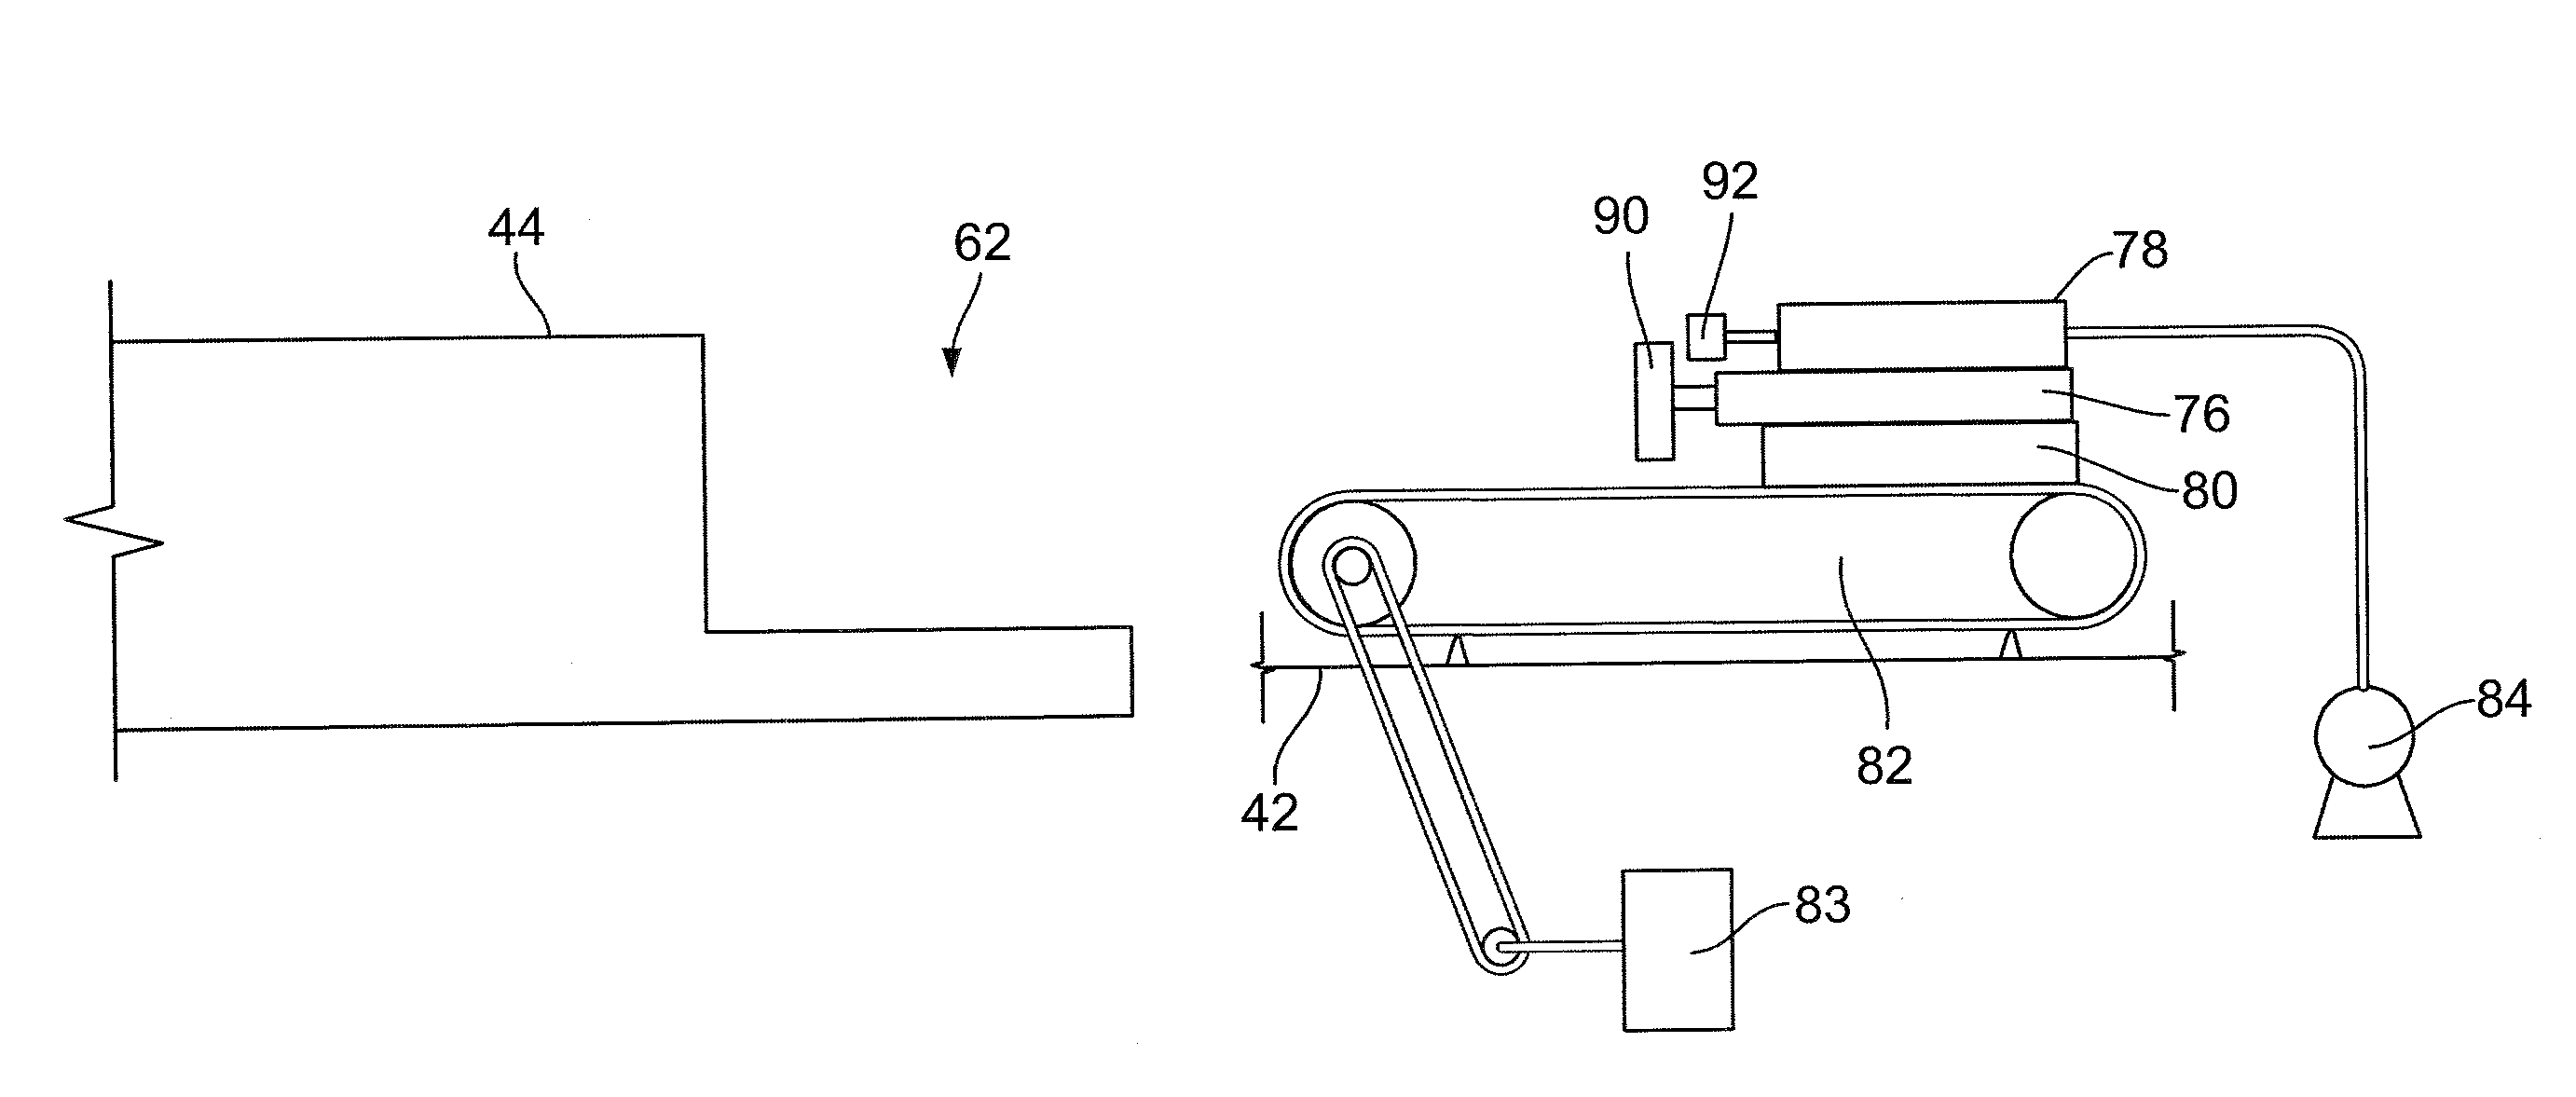 Automated loader with cone horn